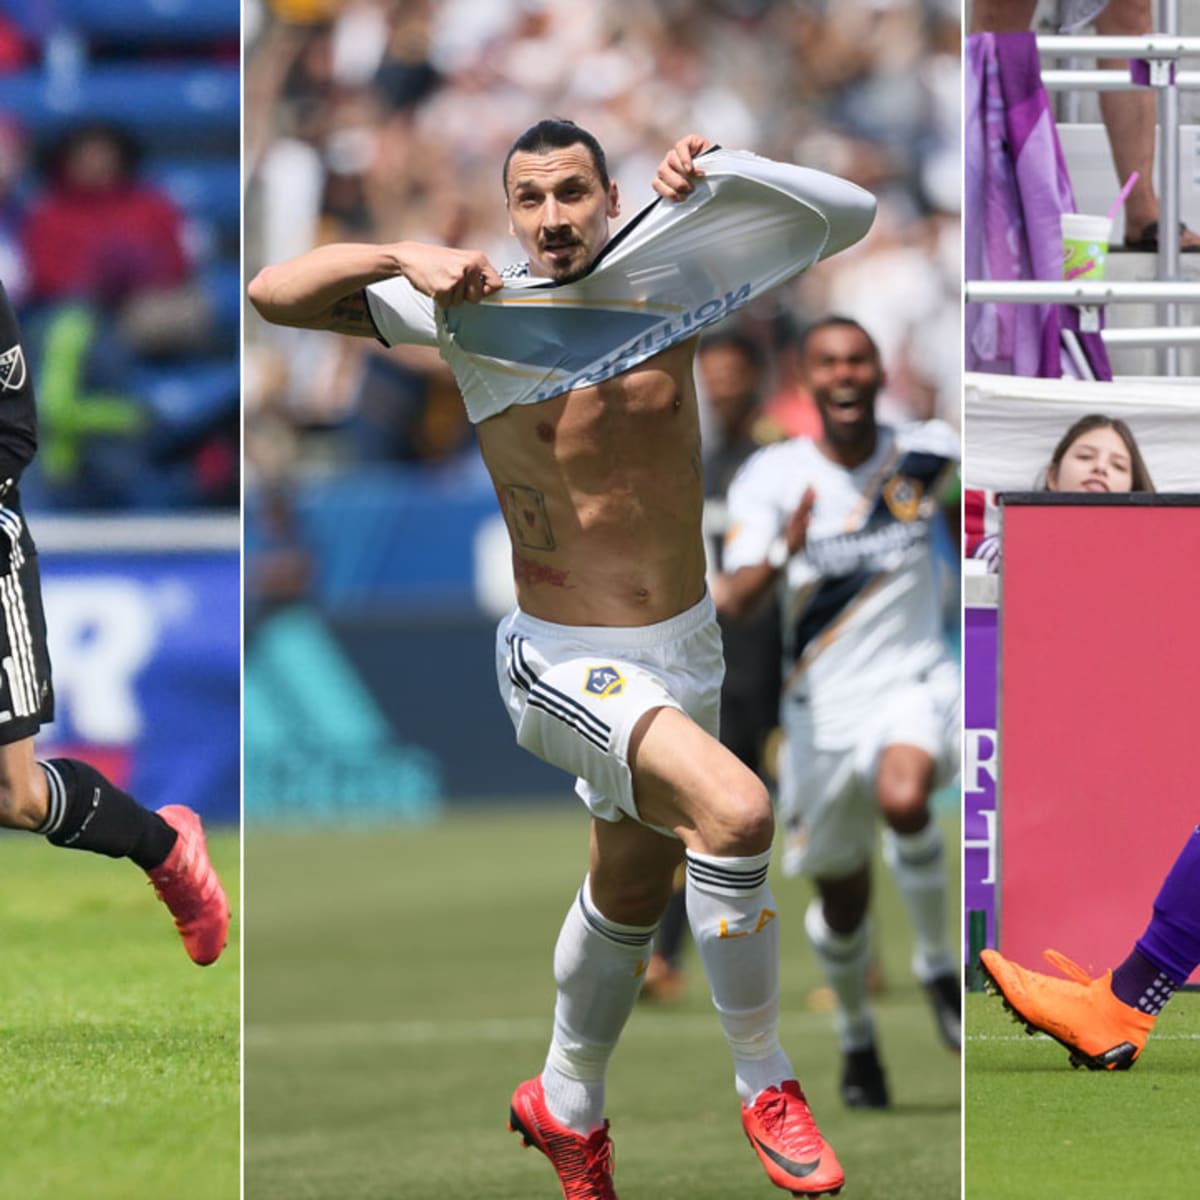 ICYMI: LAFC Is Your New Favorite L.A. Soccer Team!